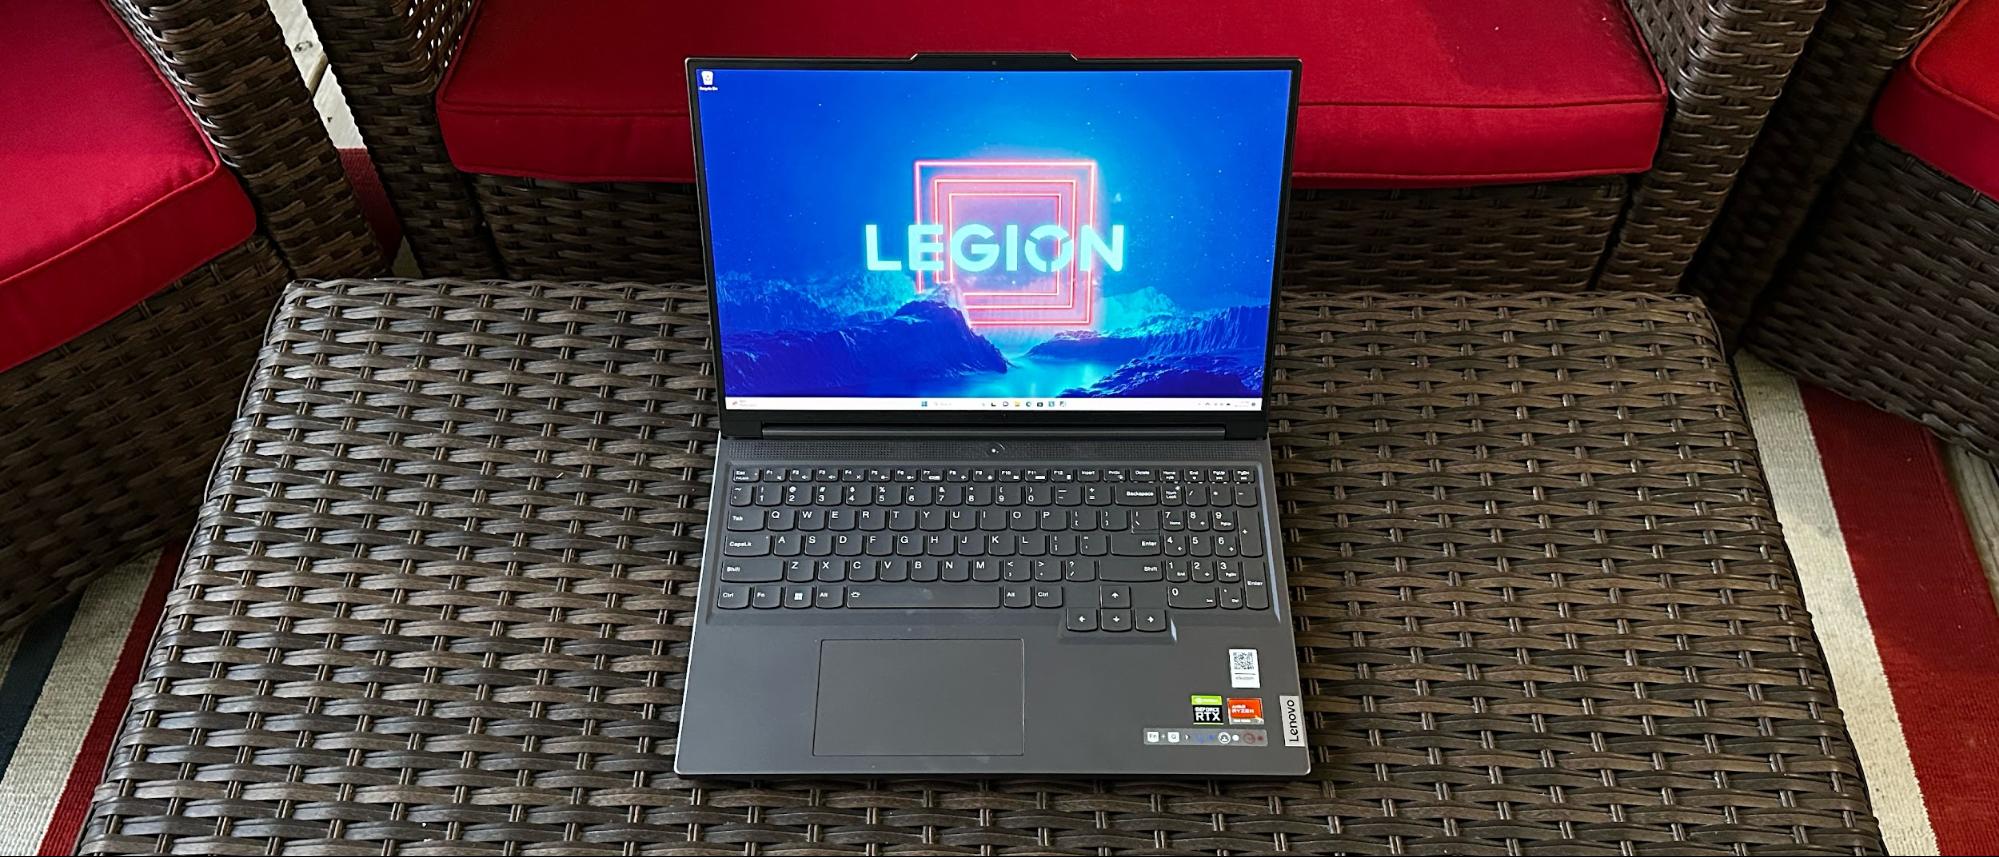 Lenovo Legion 5 Pro review: A solid gaming laptop at a superb price